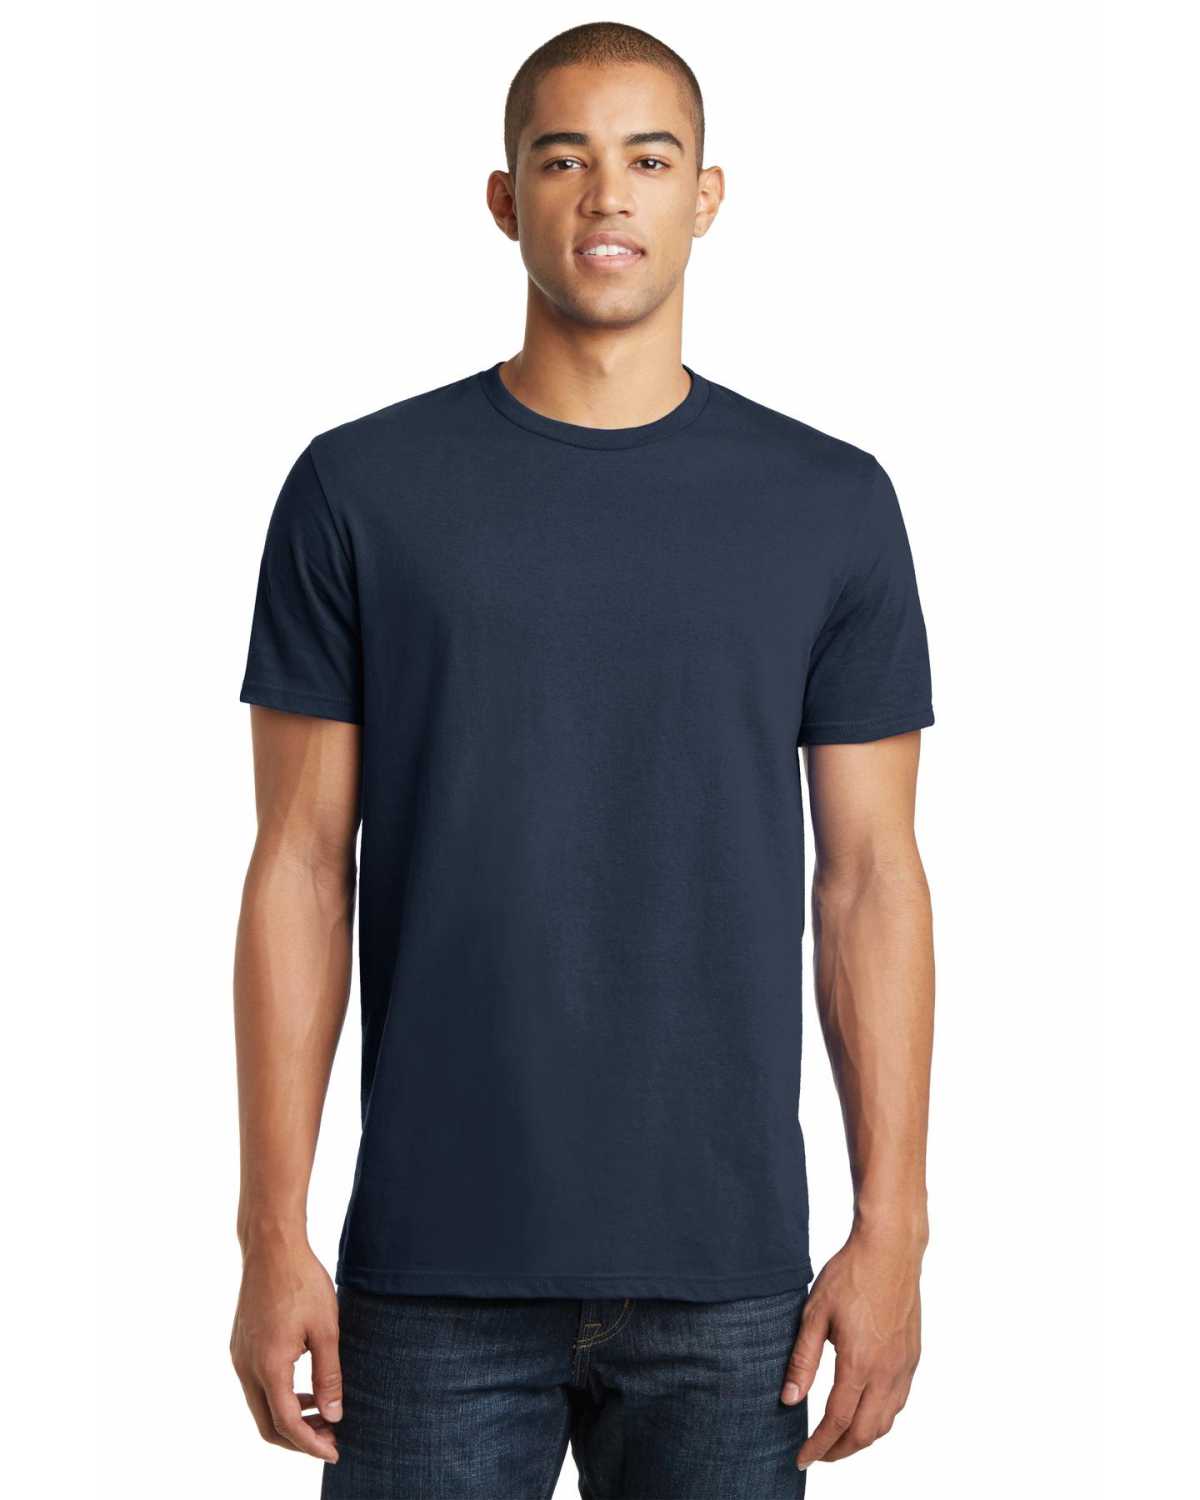 District DT5000 Young Mens The Concert Tee on discount | ApparelChoice.com